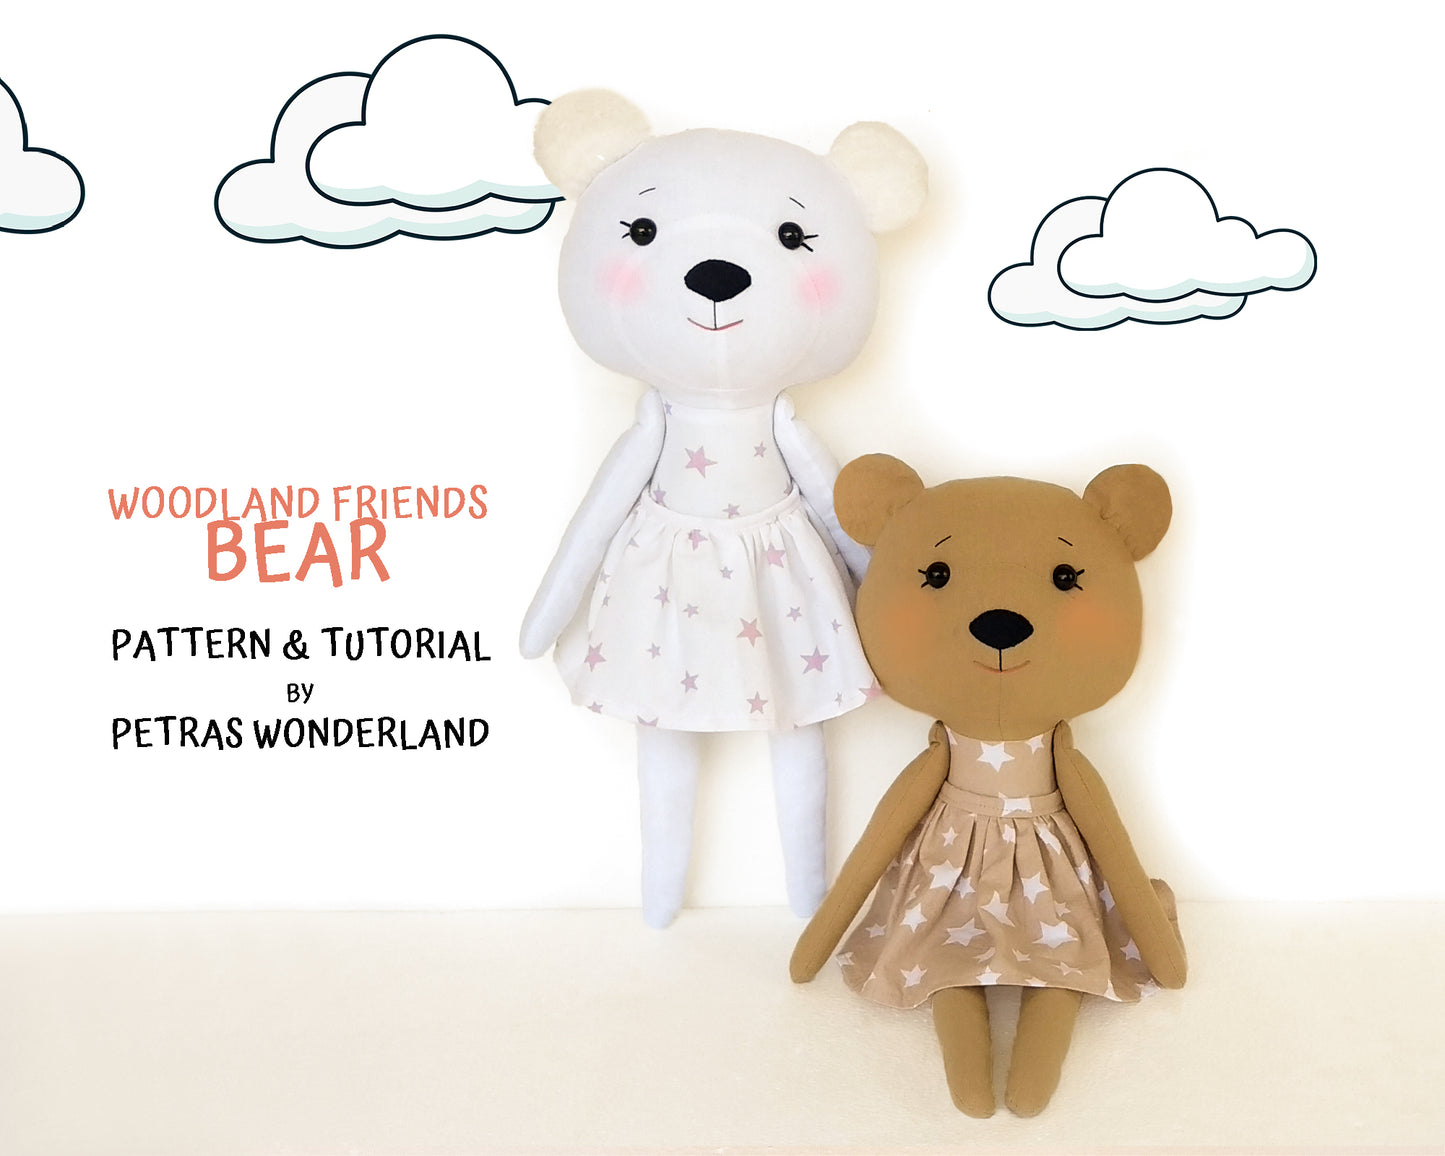 Woodland Friends Bear - PDF doll sewing pattern and tutorial